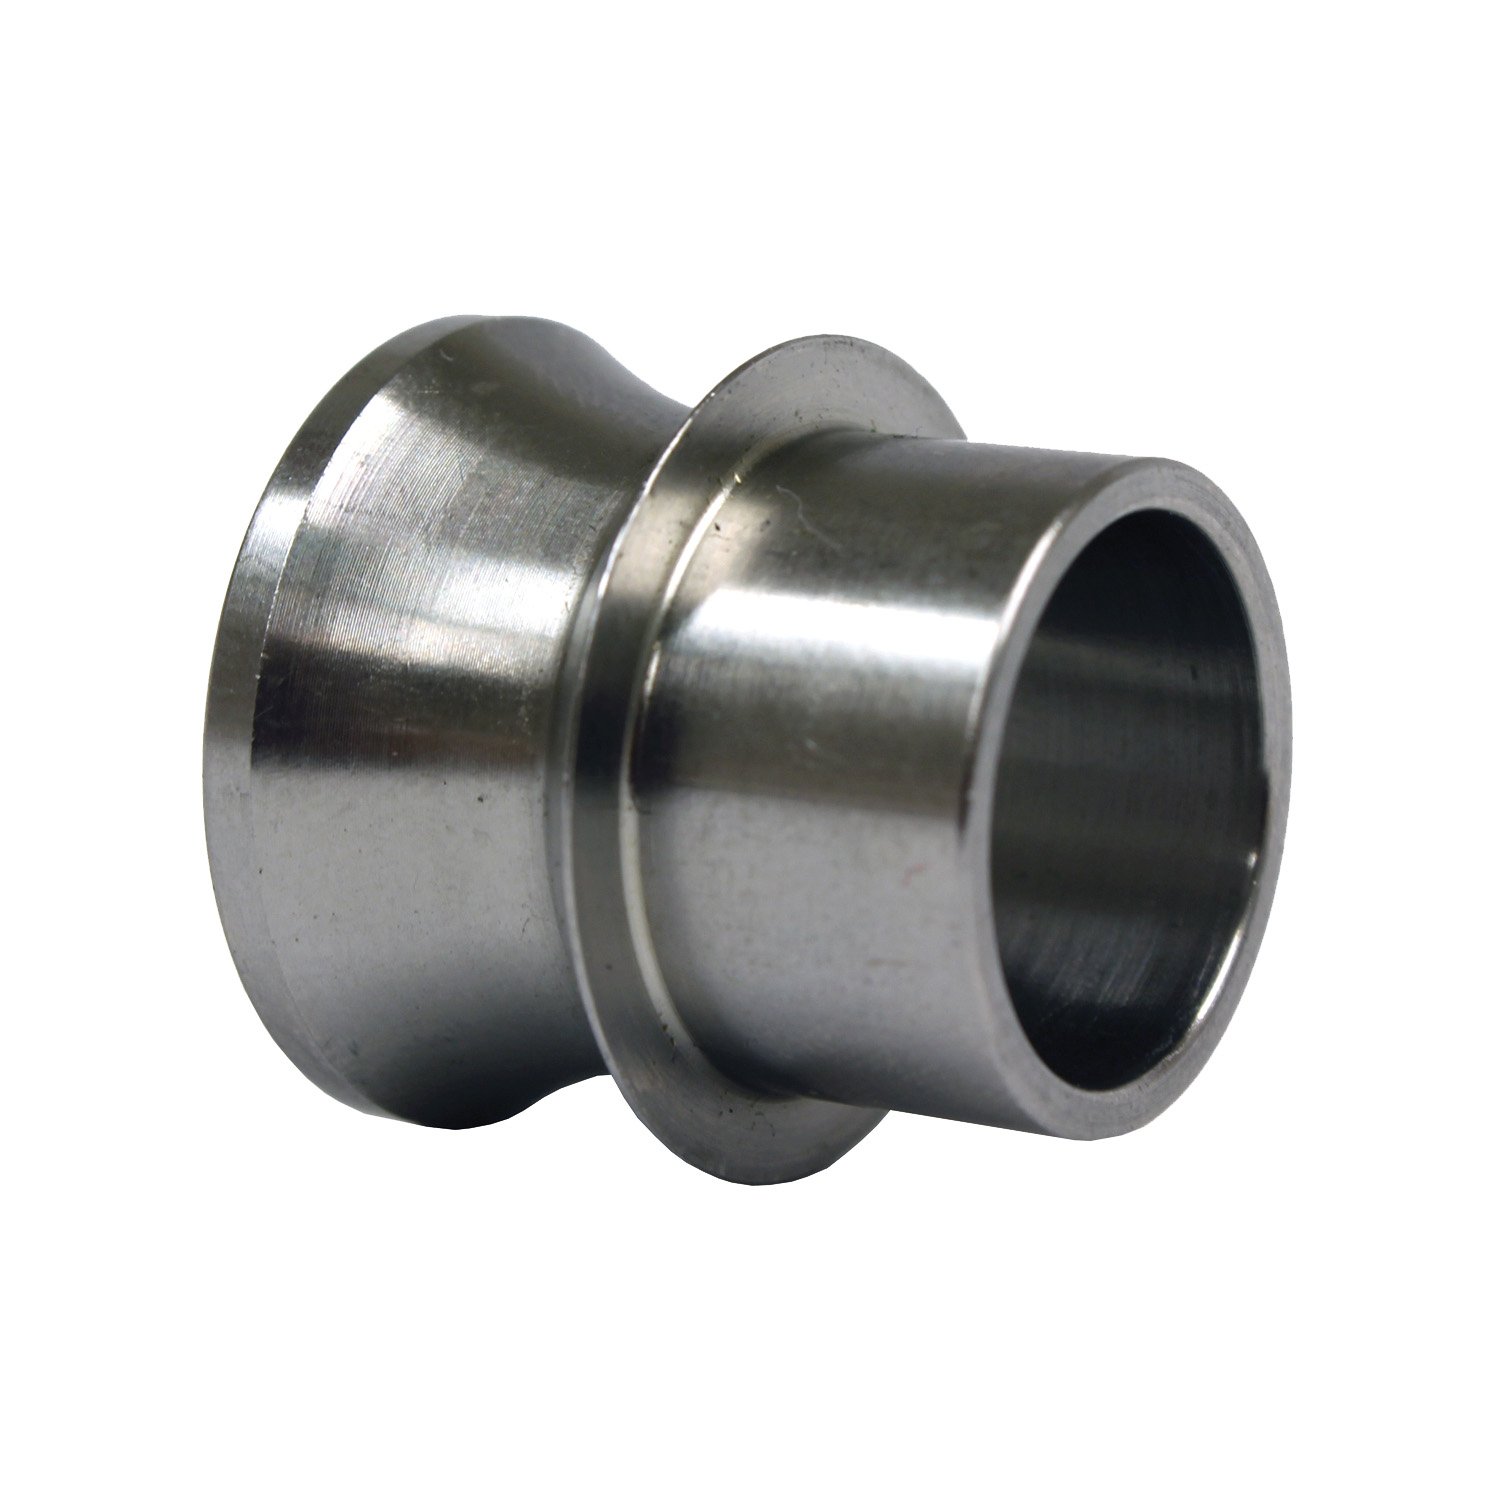 High Misalignment Spacer with Standard Ball Width